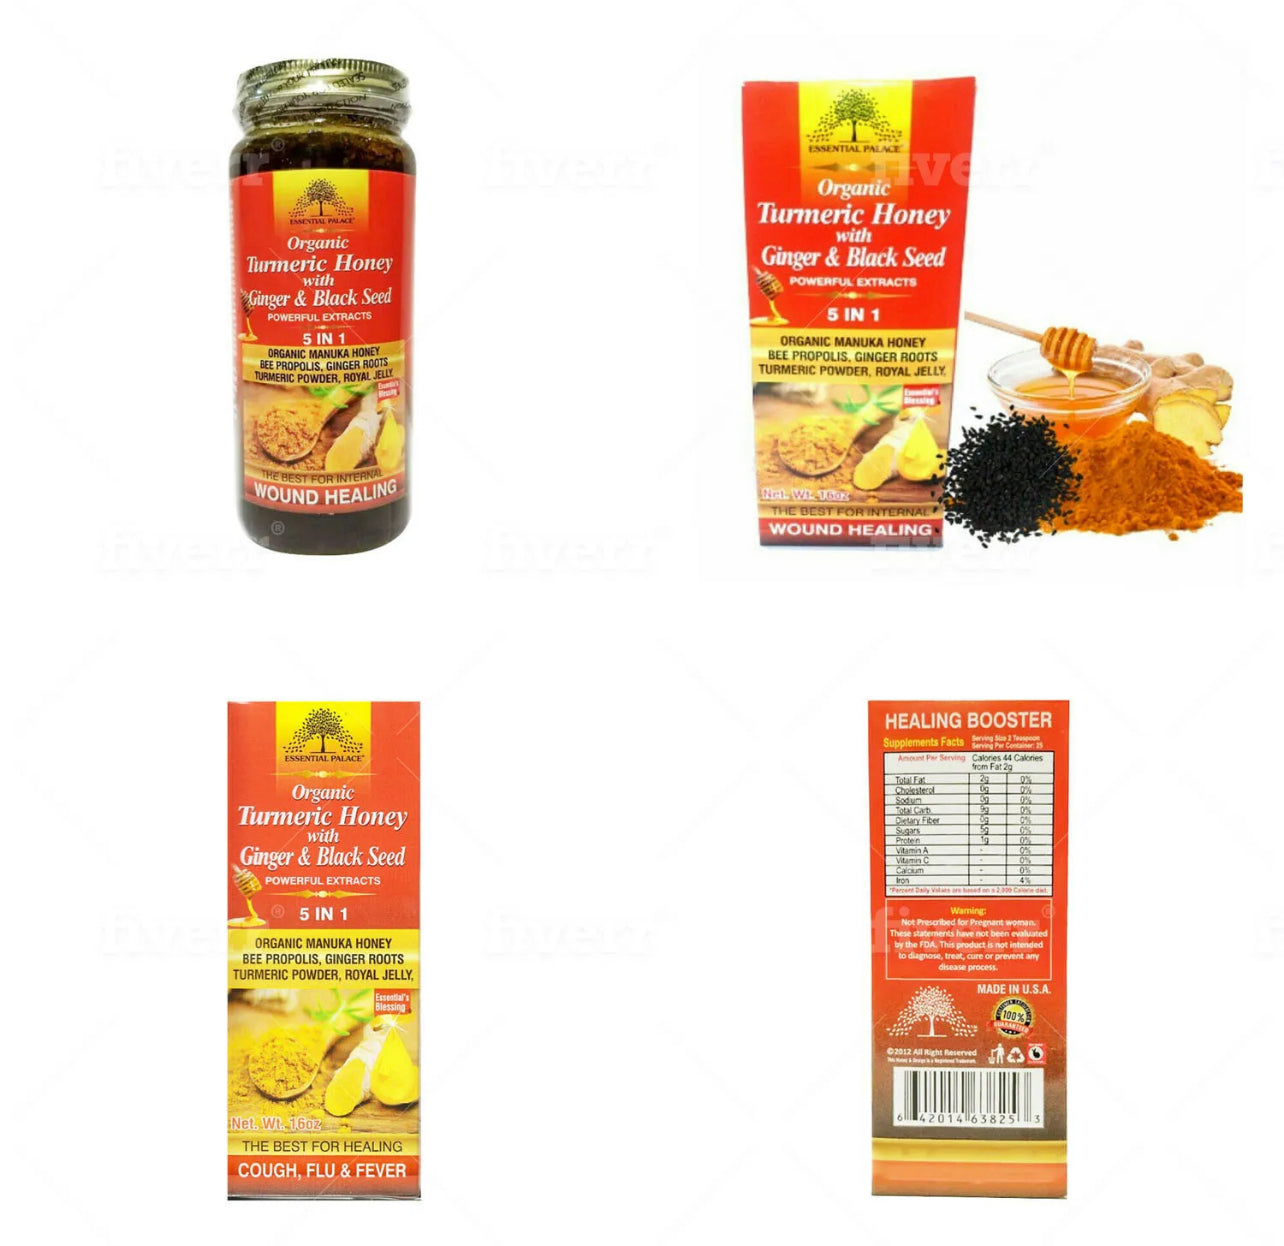 Essential Palace Organic Turmeric Honey With Ginger and Black Seed, 5 IN 1 Good For Cough, Flu, Fever and Wound Healing - Kulcha Kernel